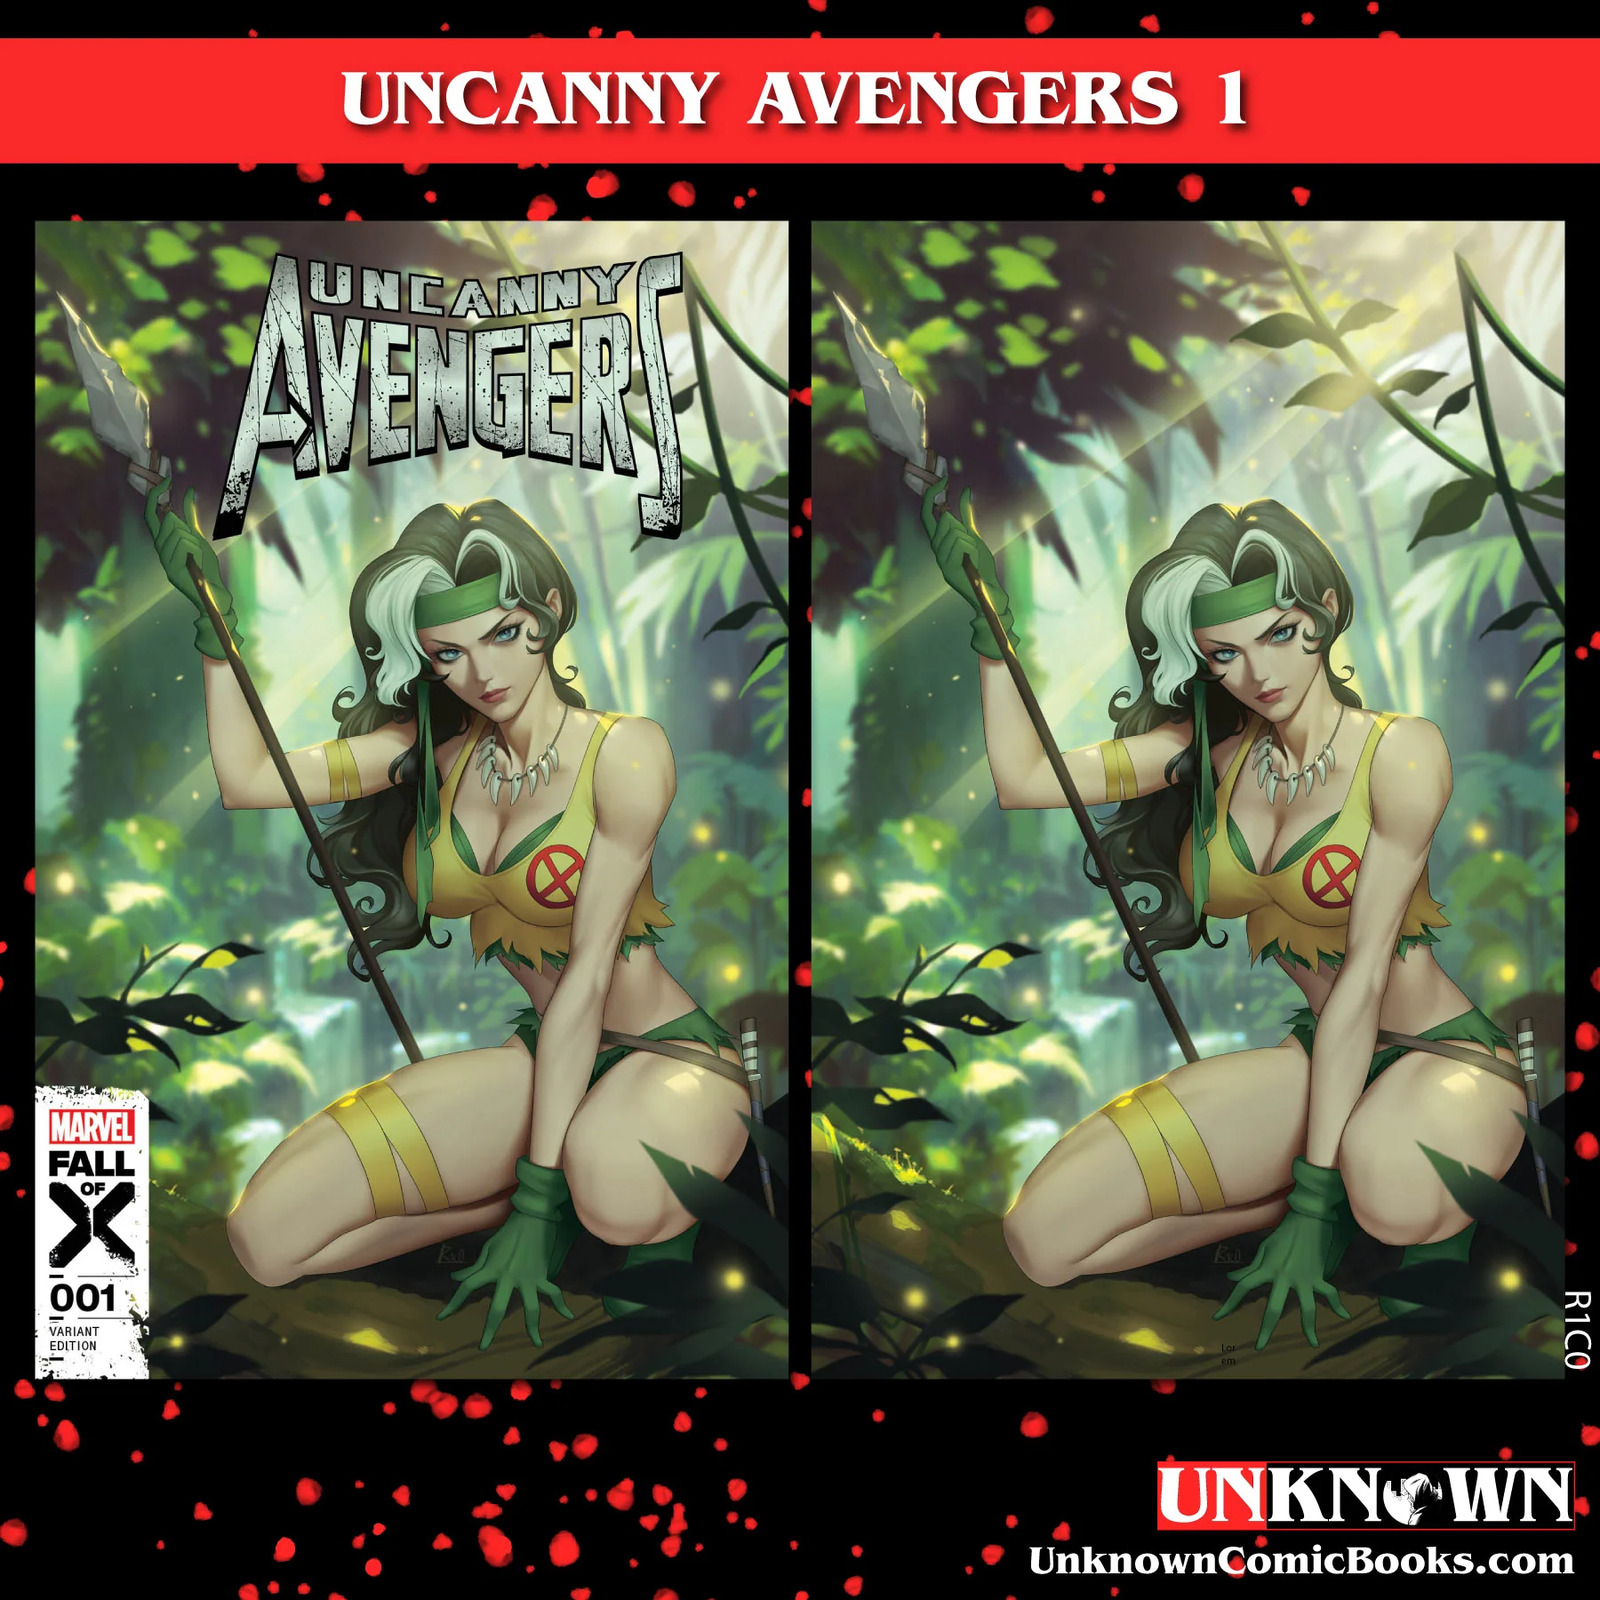 [2 PACK] UNCANNY AVENGERS #1 [G.O.D.S., FALL] UNKNOWN COMICS R1C0 EXCLUSIVE VAR